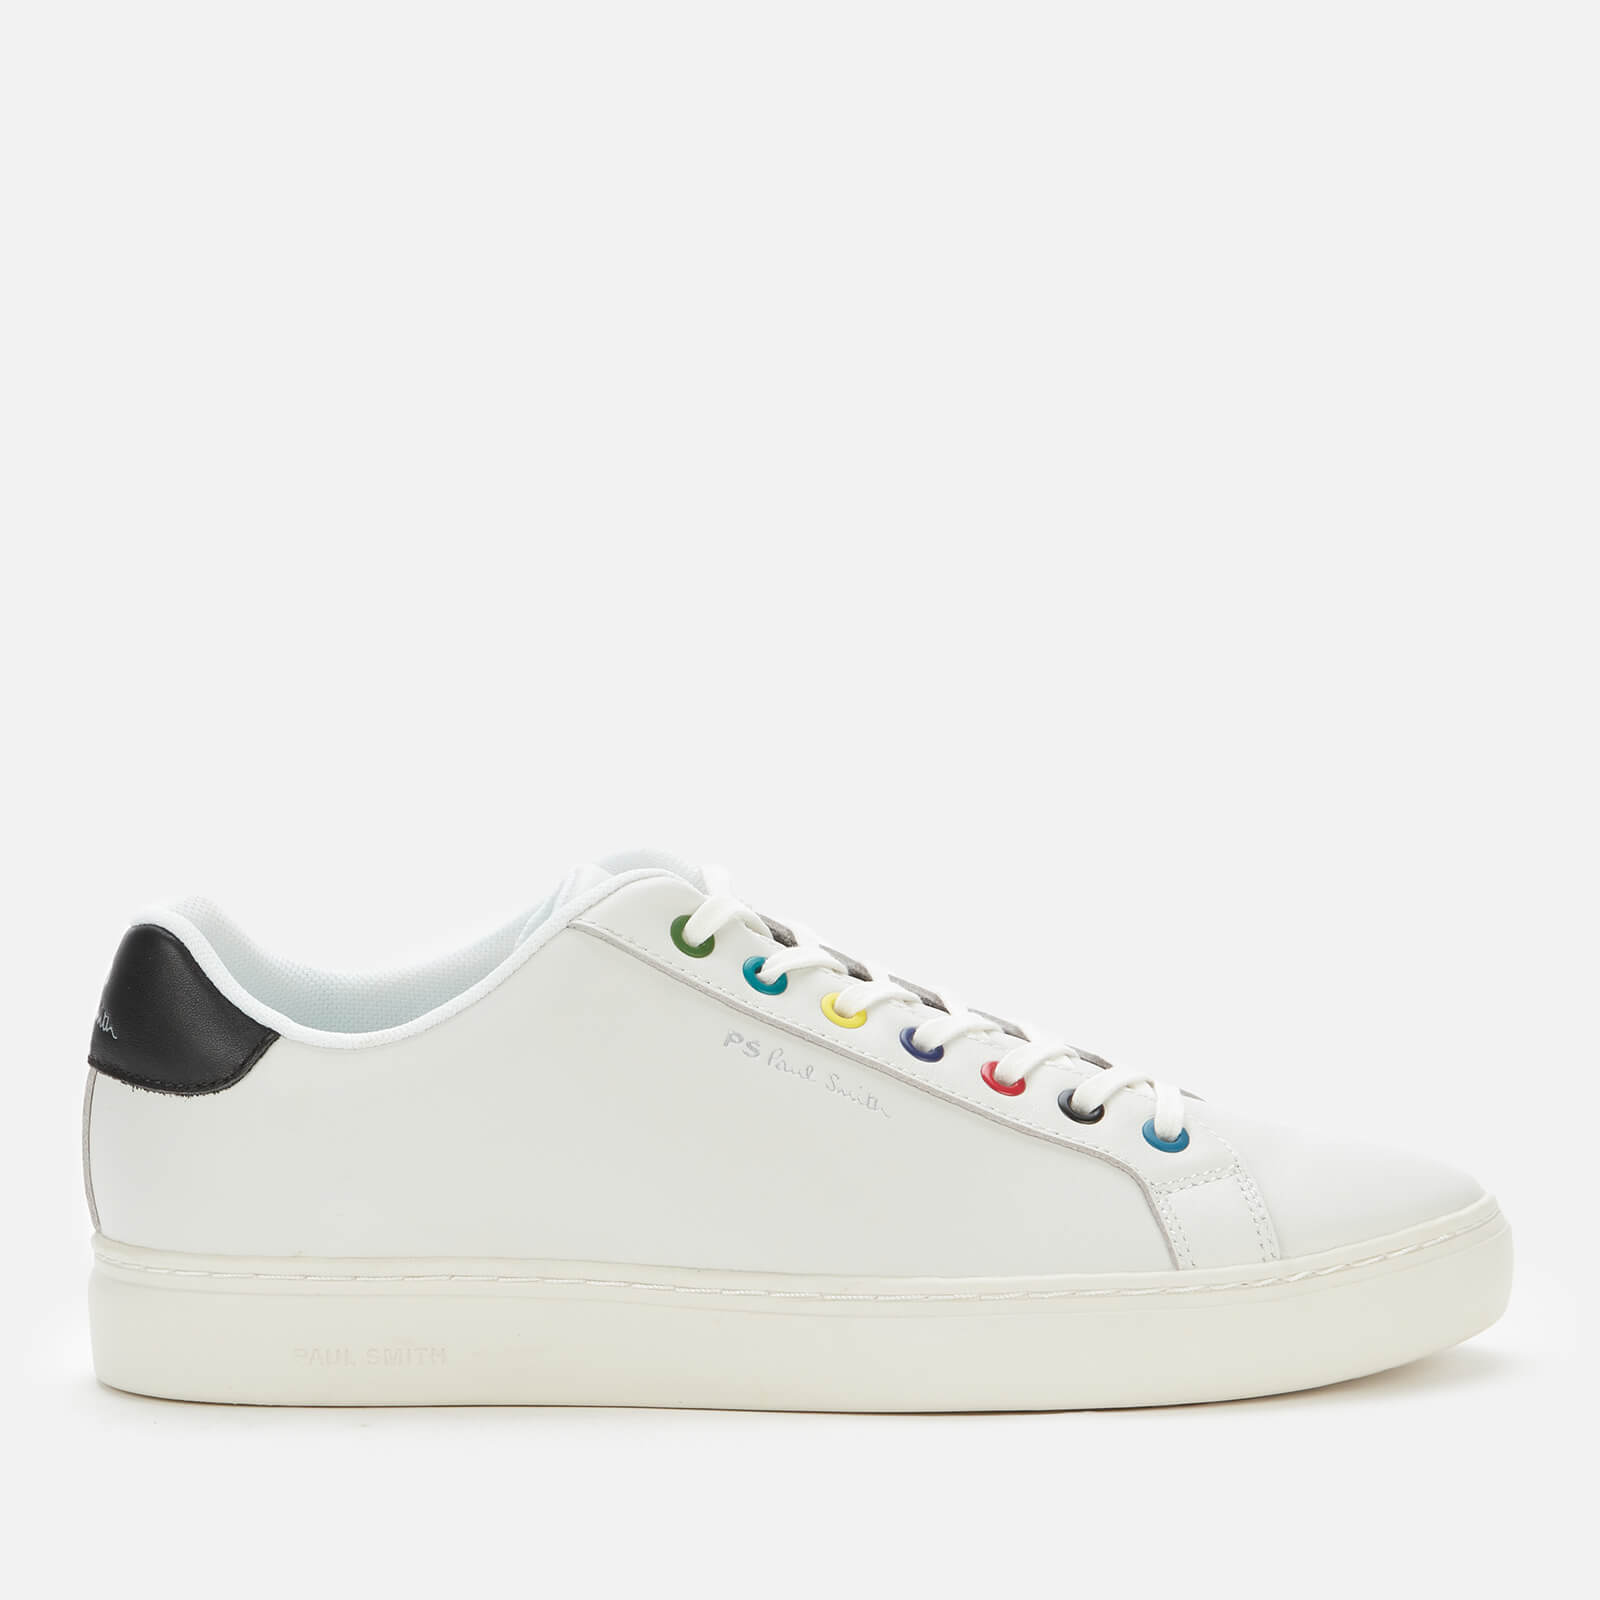 PS Paul Smith Men's Rex Multi Eyelets Leather Low Top Trainers - White - UK 7